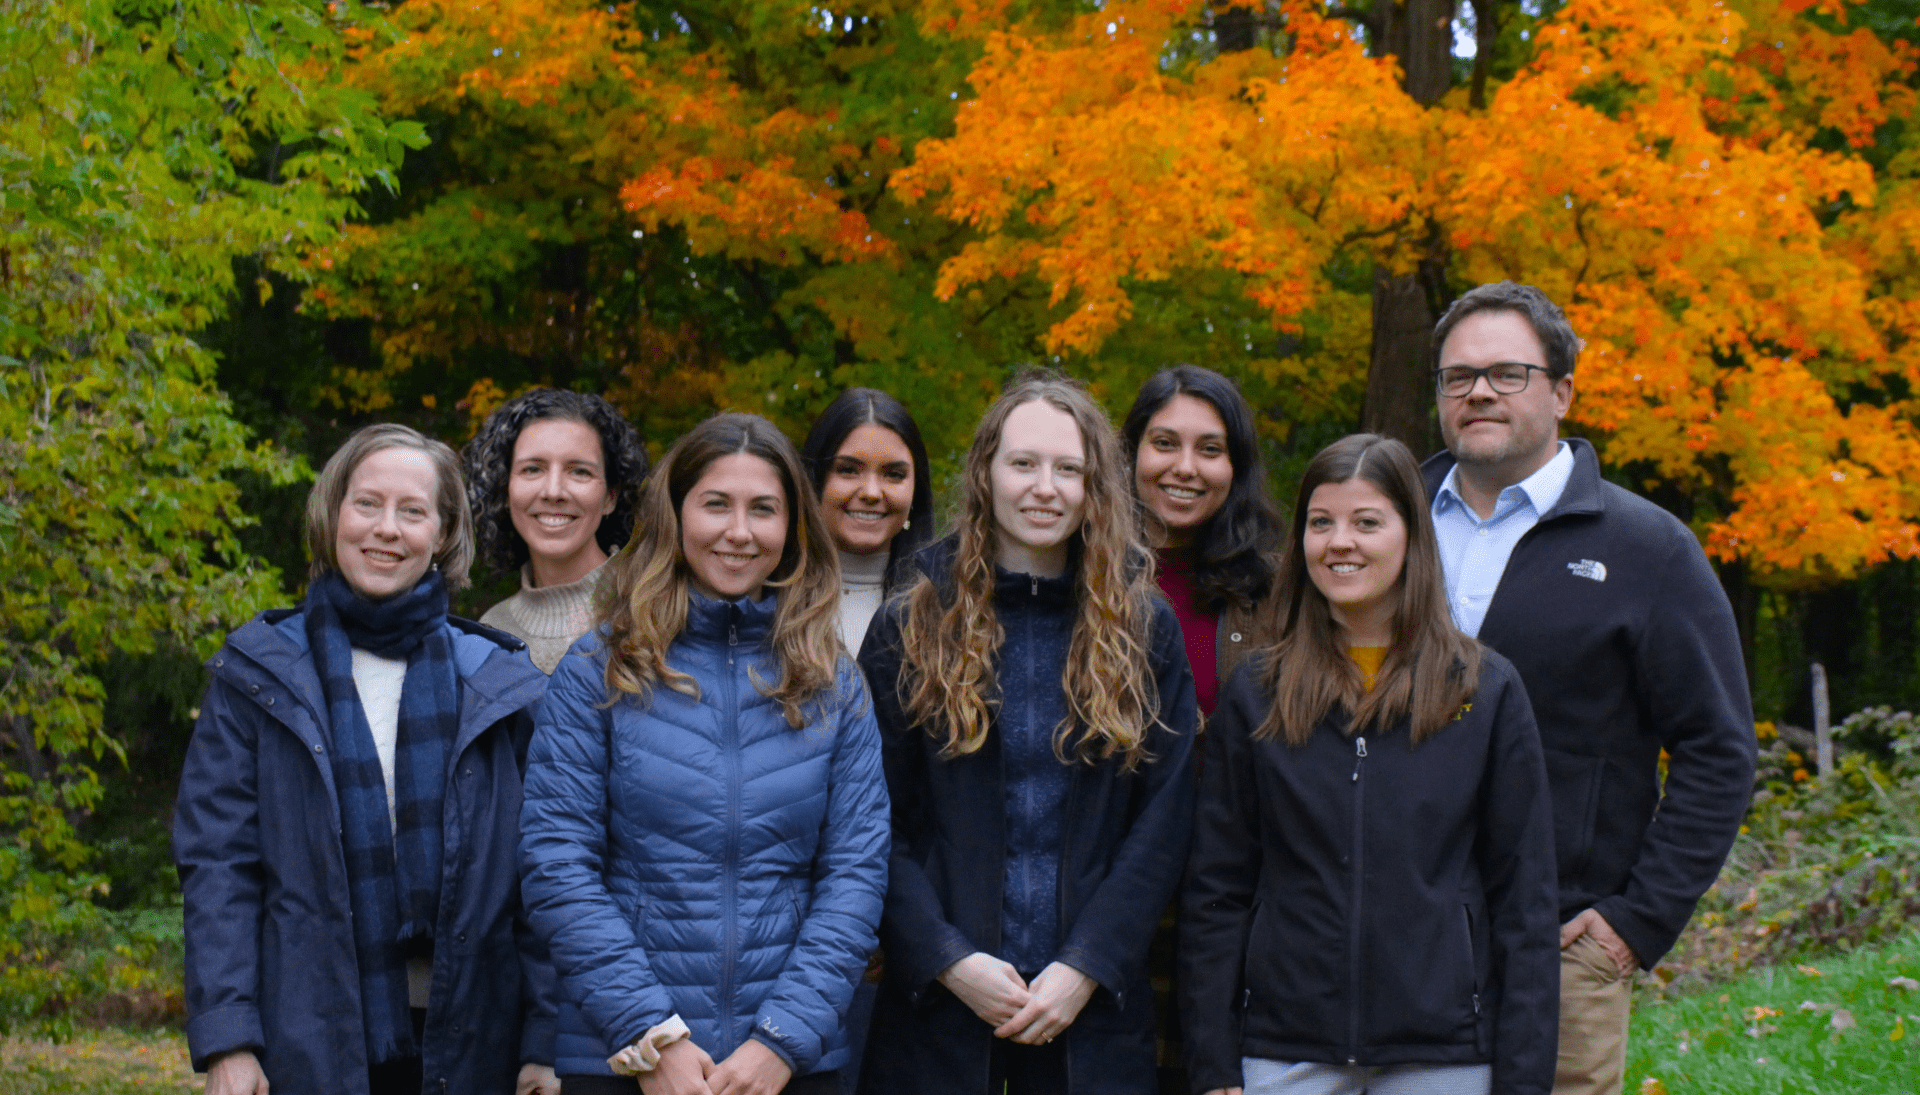 RCVM@OVC team members pose for a group portrait at the Arboretum at the University of Guelph